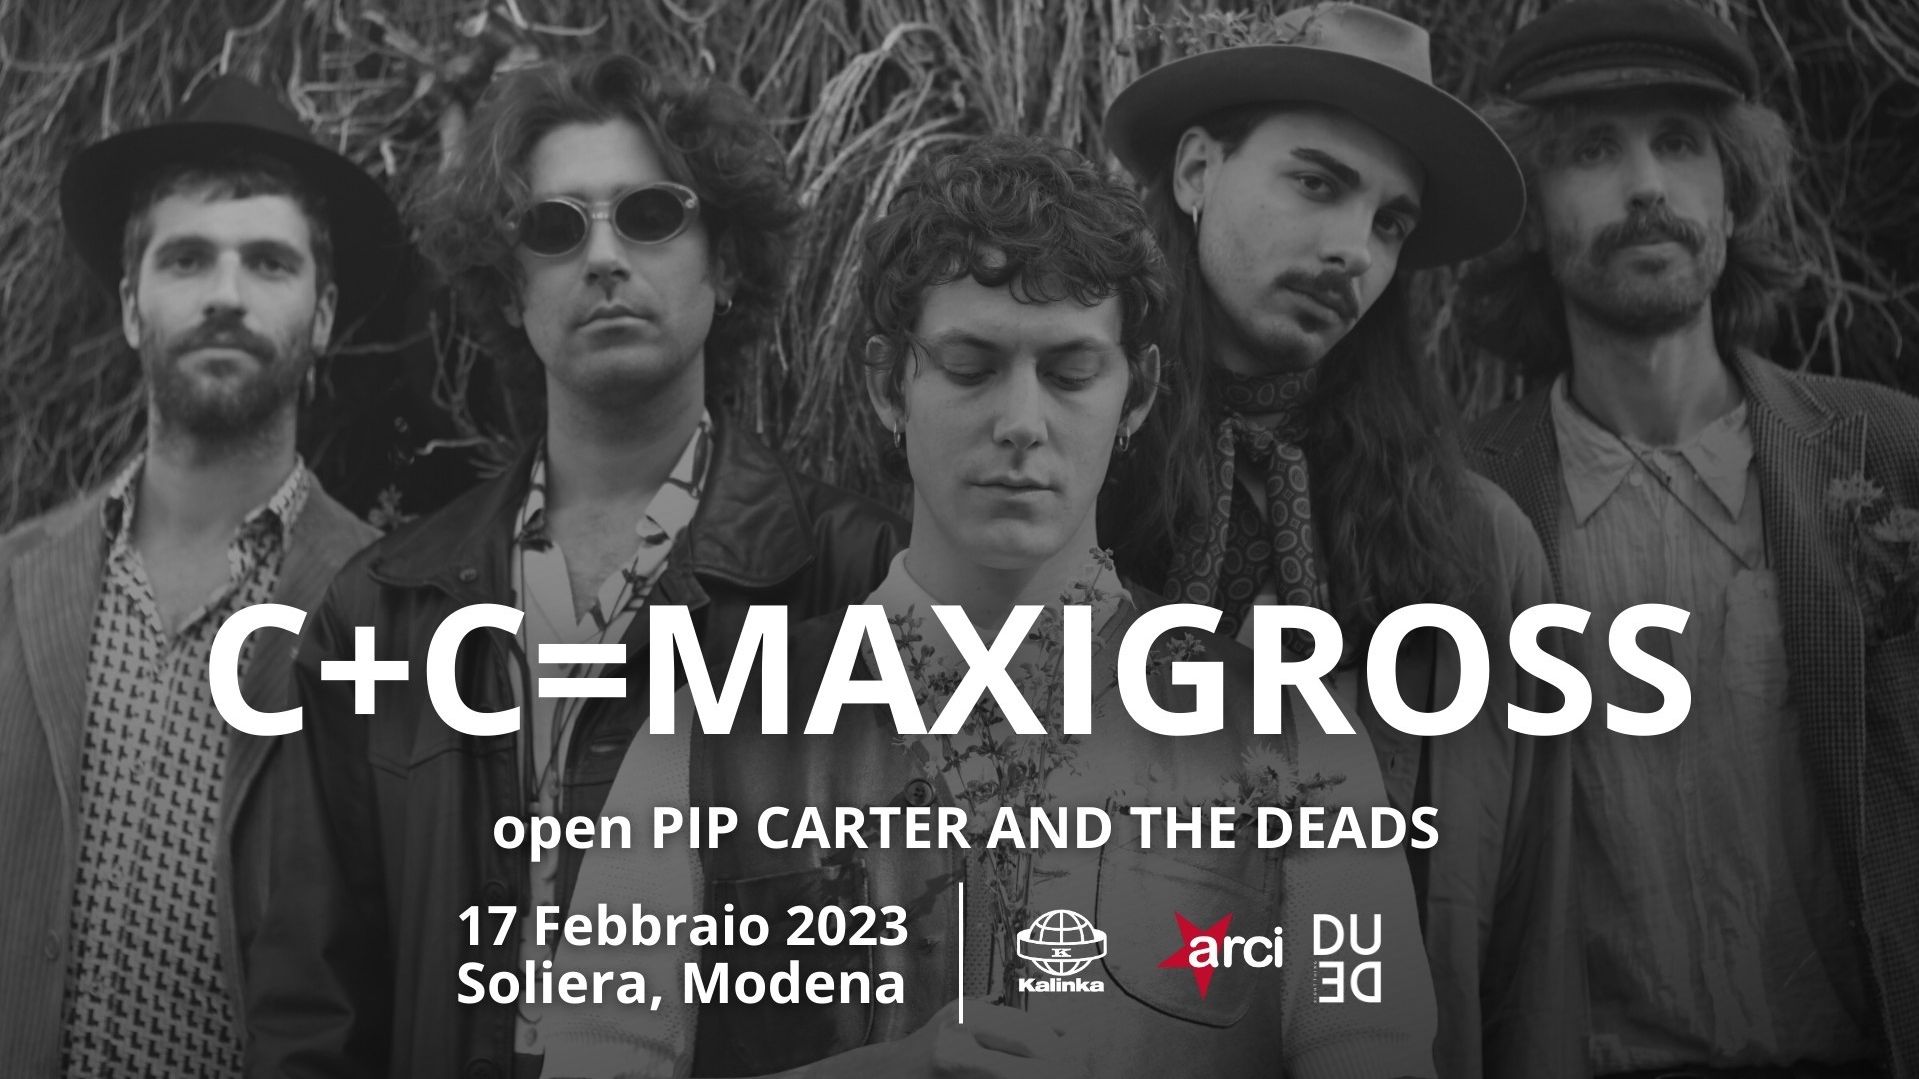 C+C = MAXIGROSS + Pip Carter and the Deads